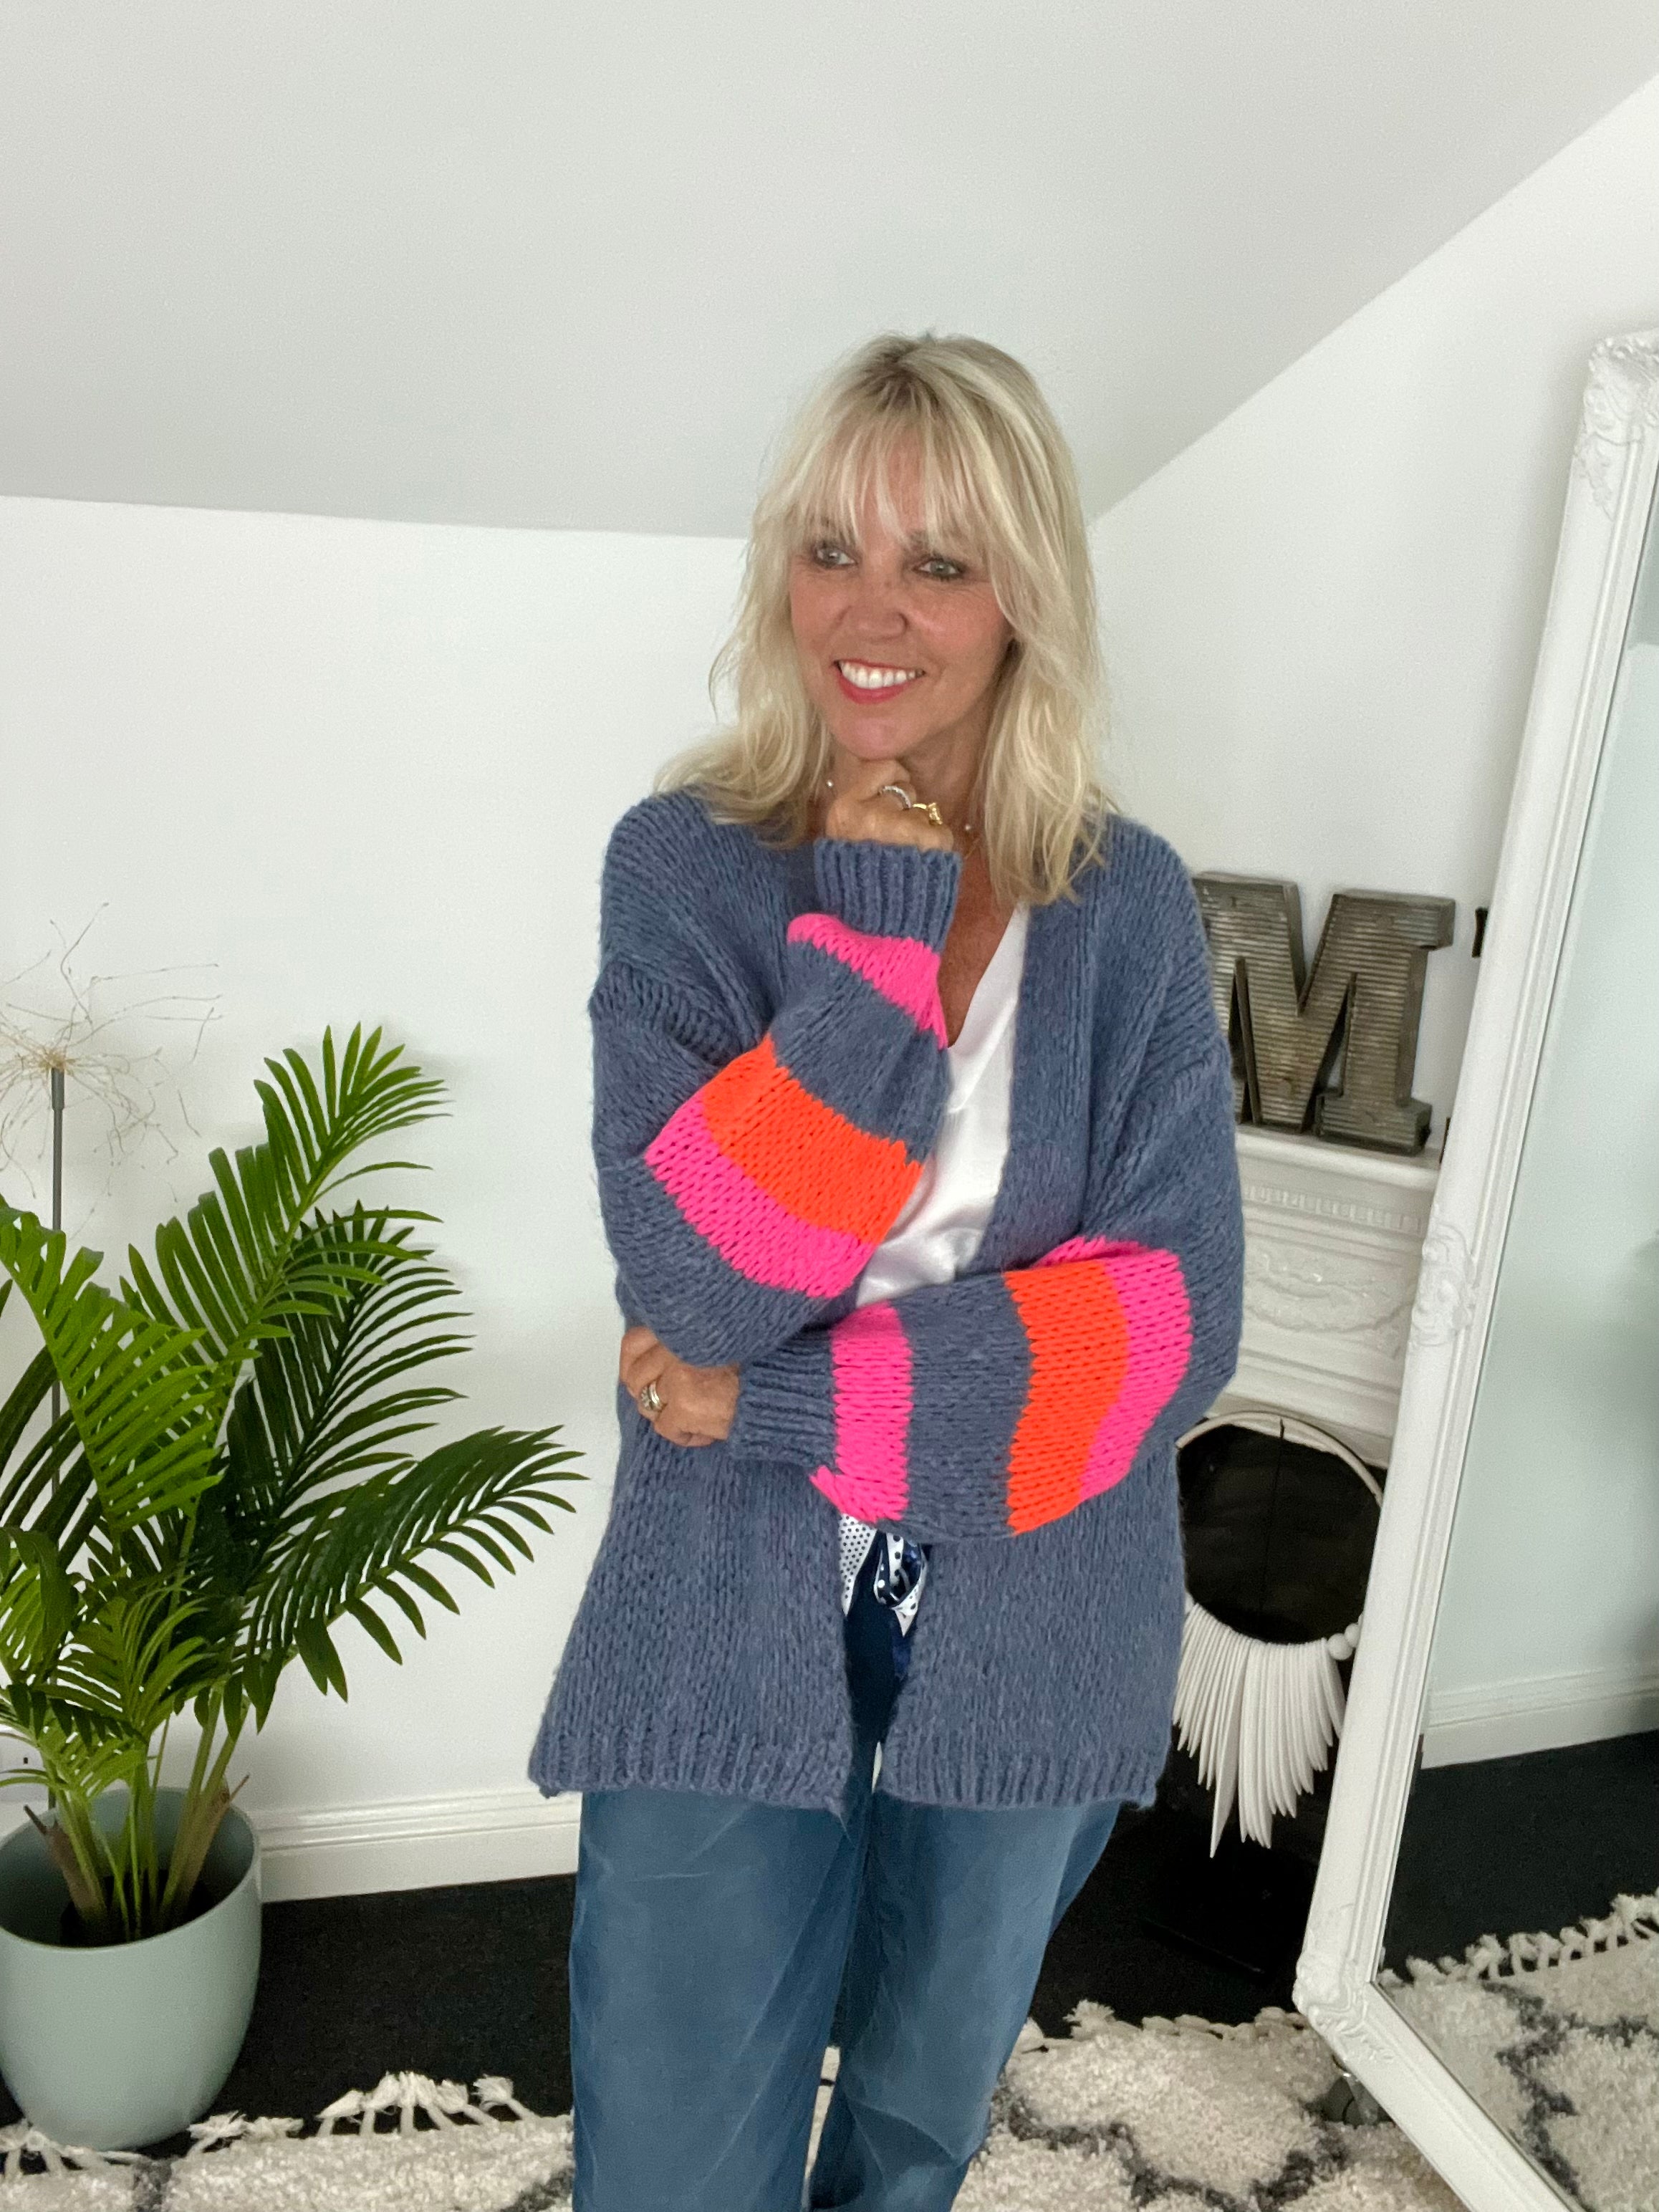 Luxe Cardi with Stripe Sleeves in Denim Blue